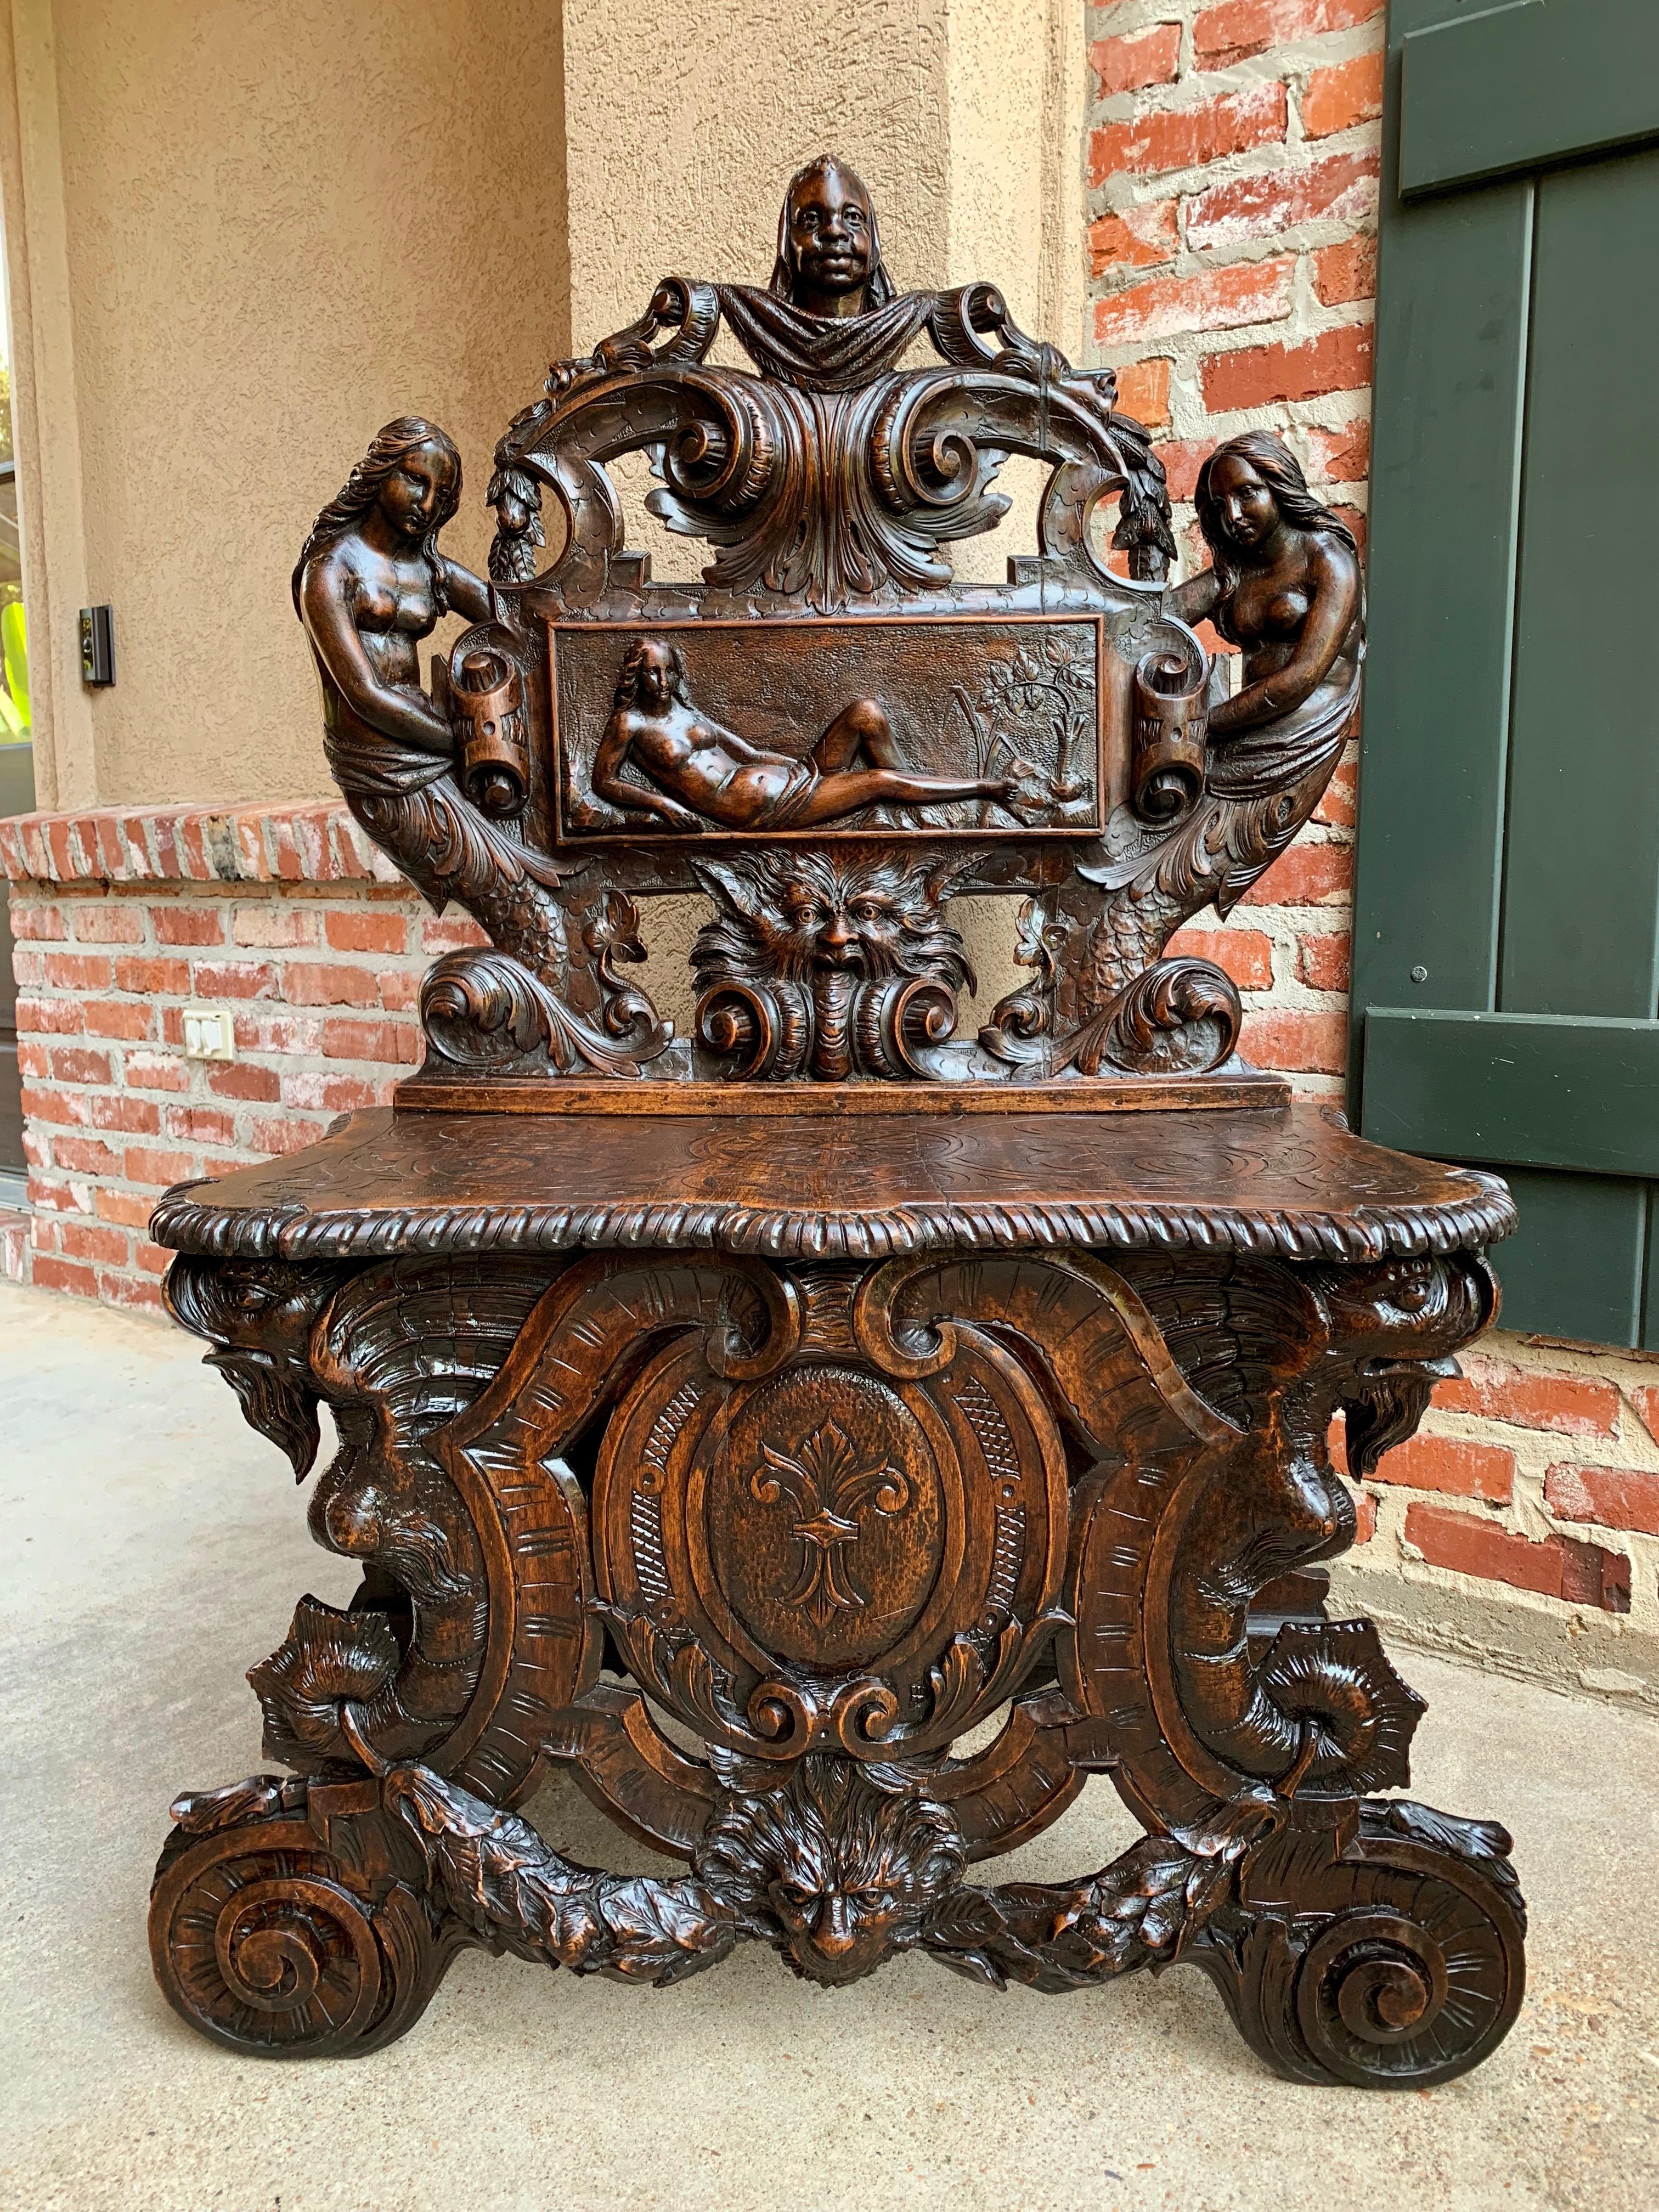 Direct from France, highly ornate antique French carved oak renaissance hall bench or loveseat with exquisite hand carved details!
Upper crown has two full length mermaids holding the scroll/plaque that features a full length female figure in